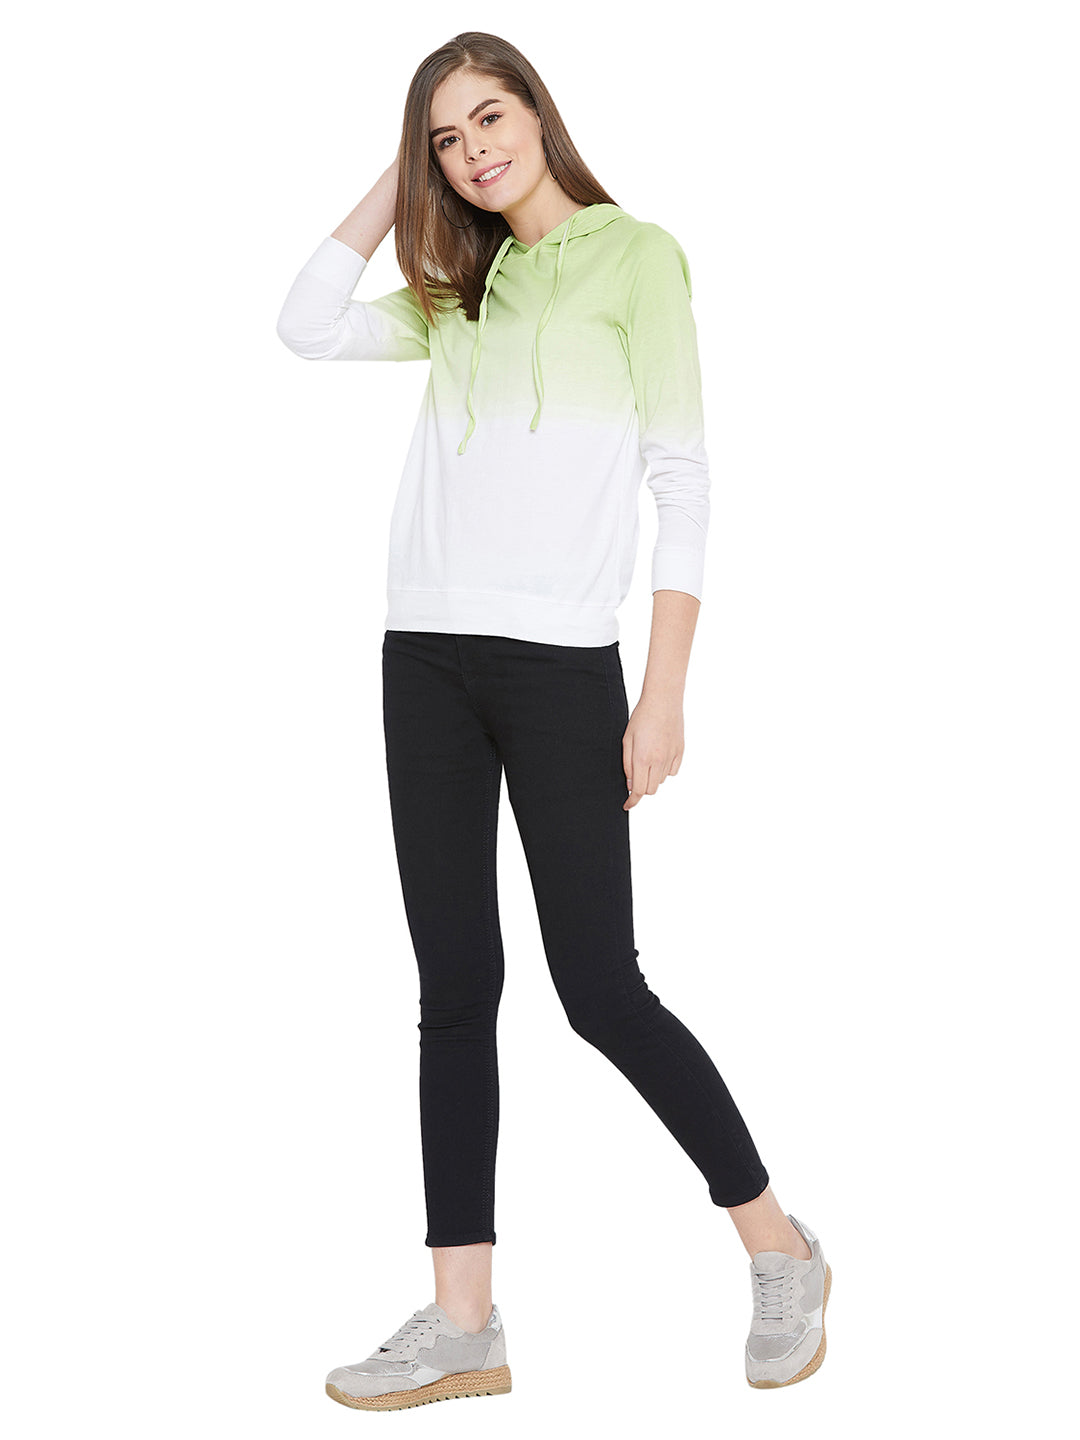 White/Green Full Sleeves Ombre Dyed Hooded T-Shirt